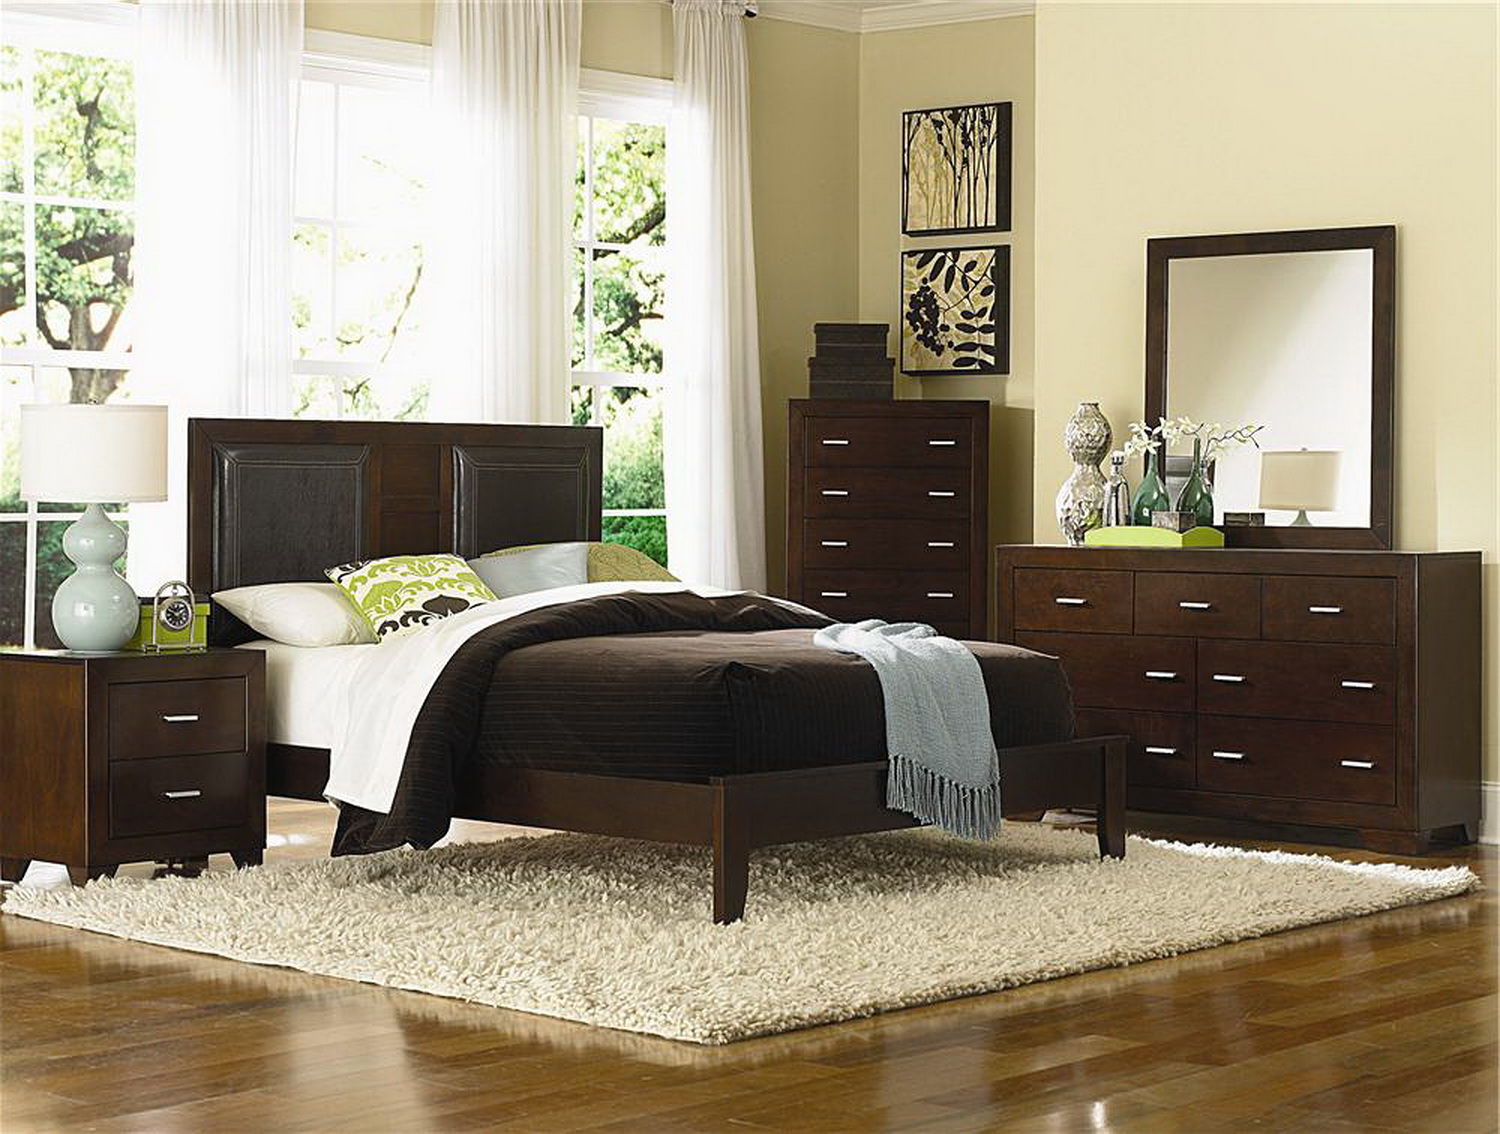 Bedroom Amazing Main Bedroom Decor With Full Size Bedroom Furniture pertaining to measurements 1500 X 1134